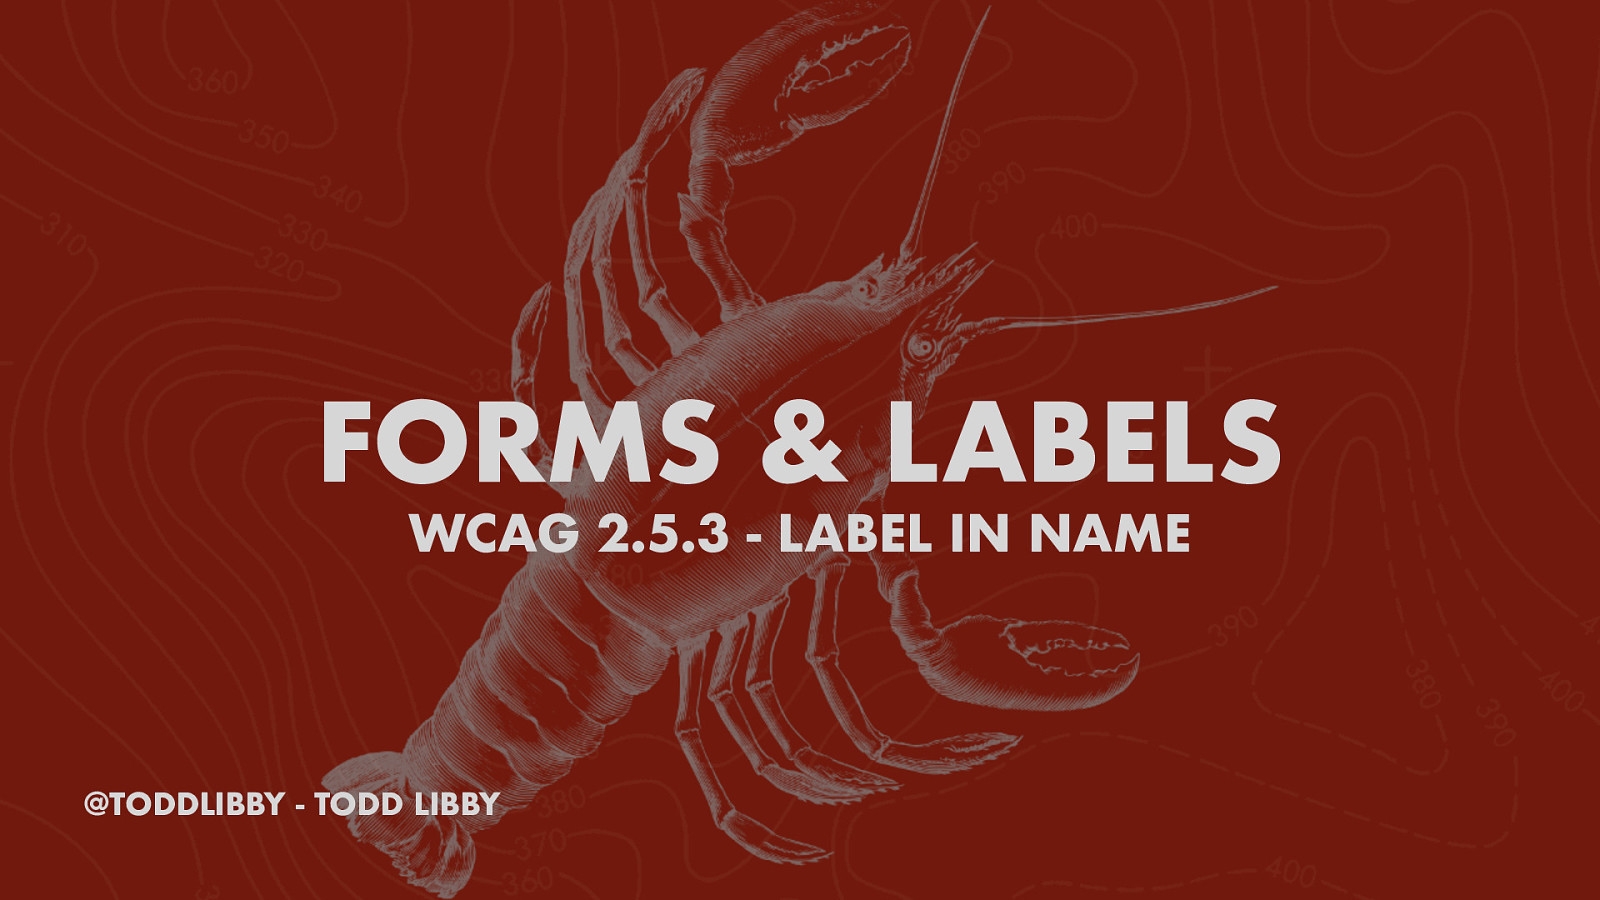 Forms & Labels: WCAG 2.5.3 - Label In Name